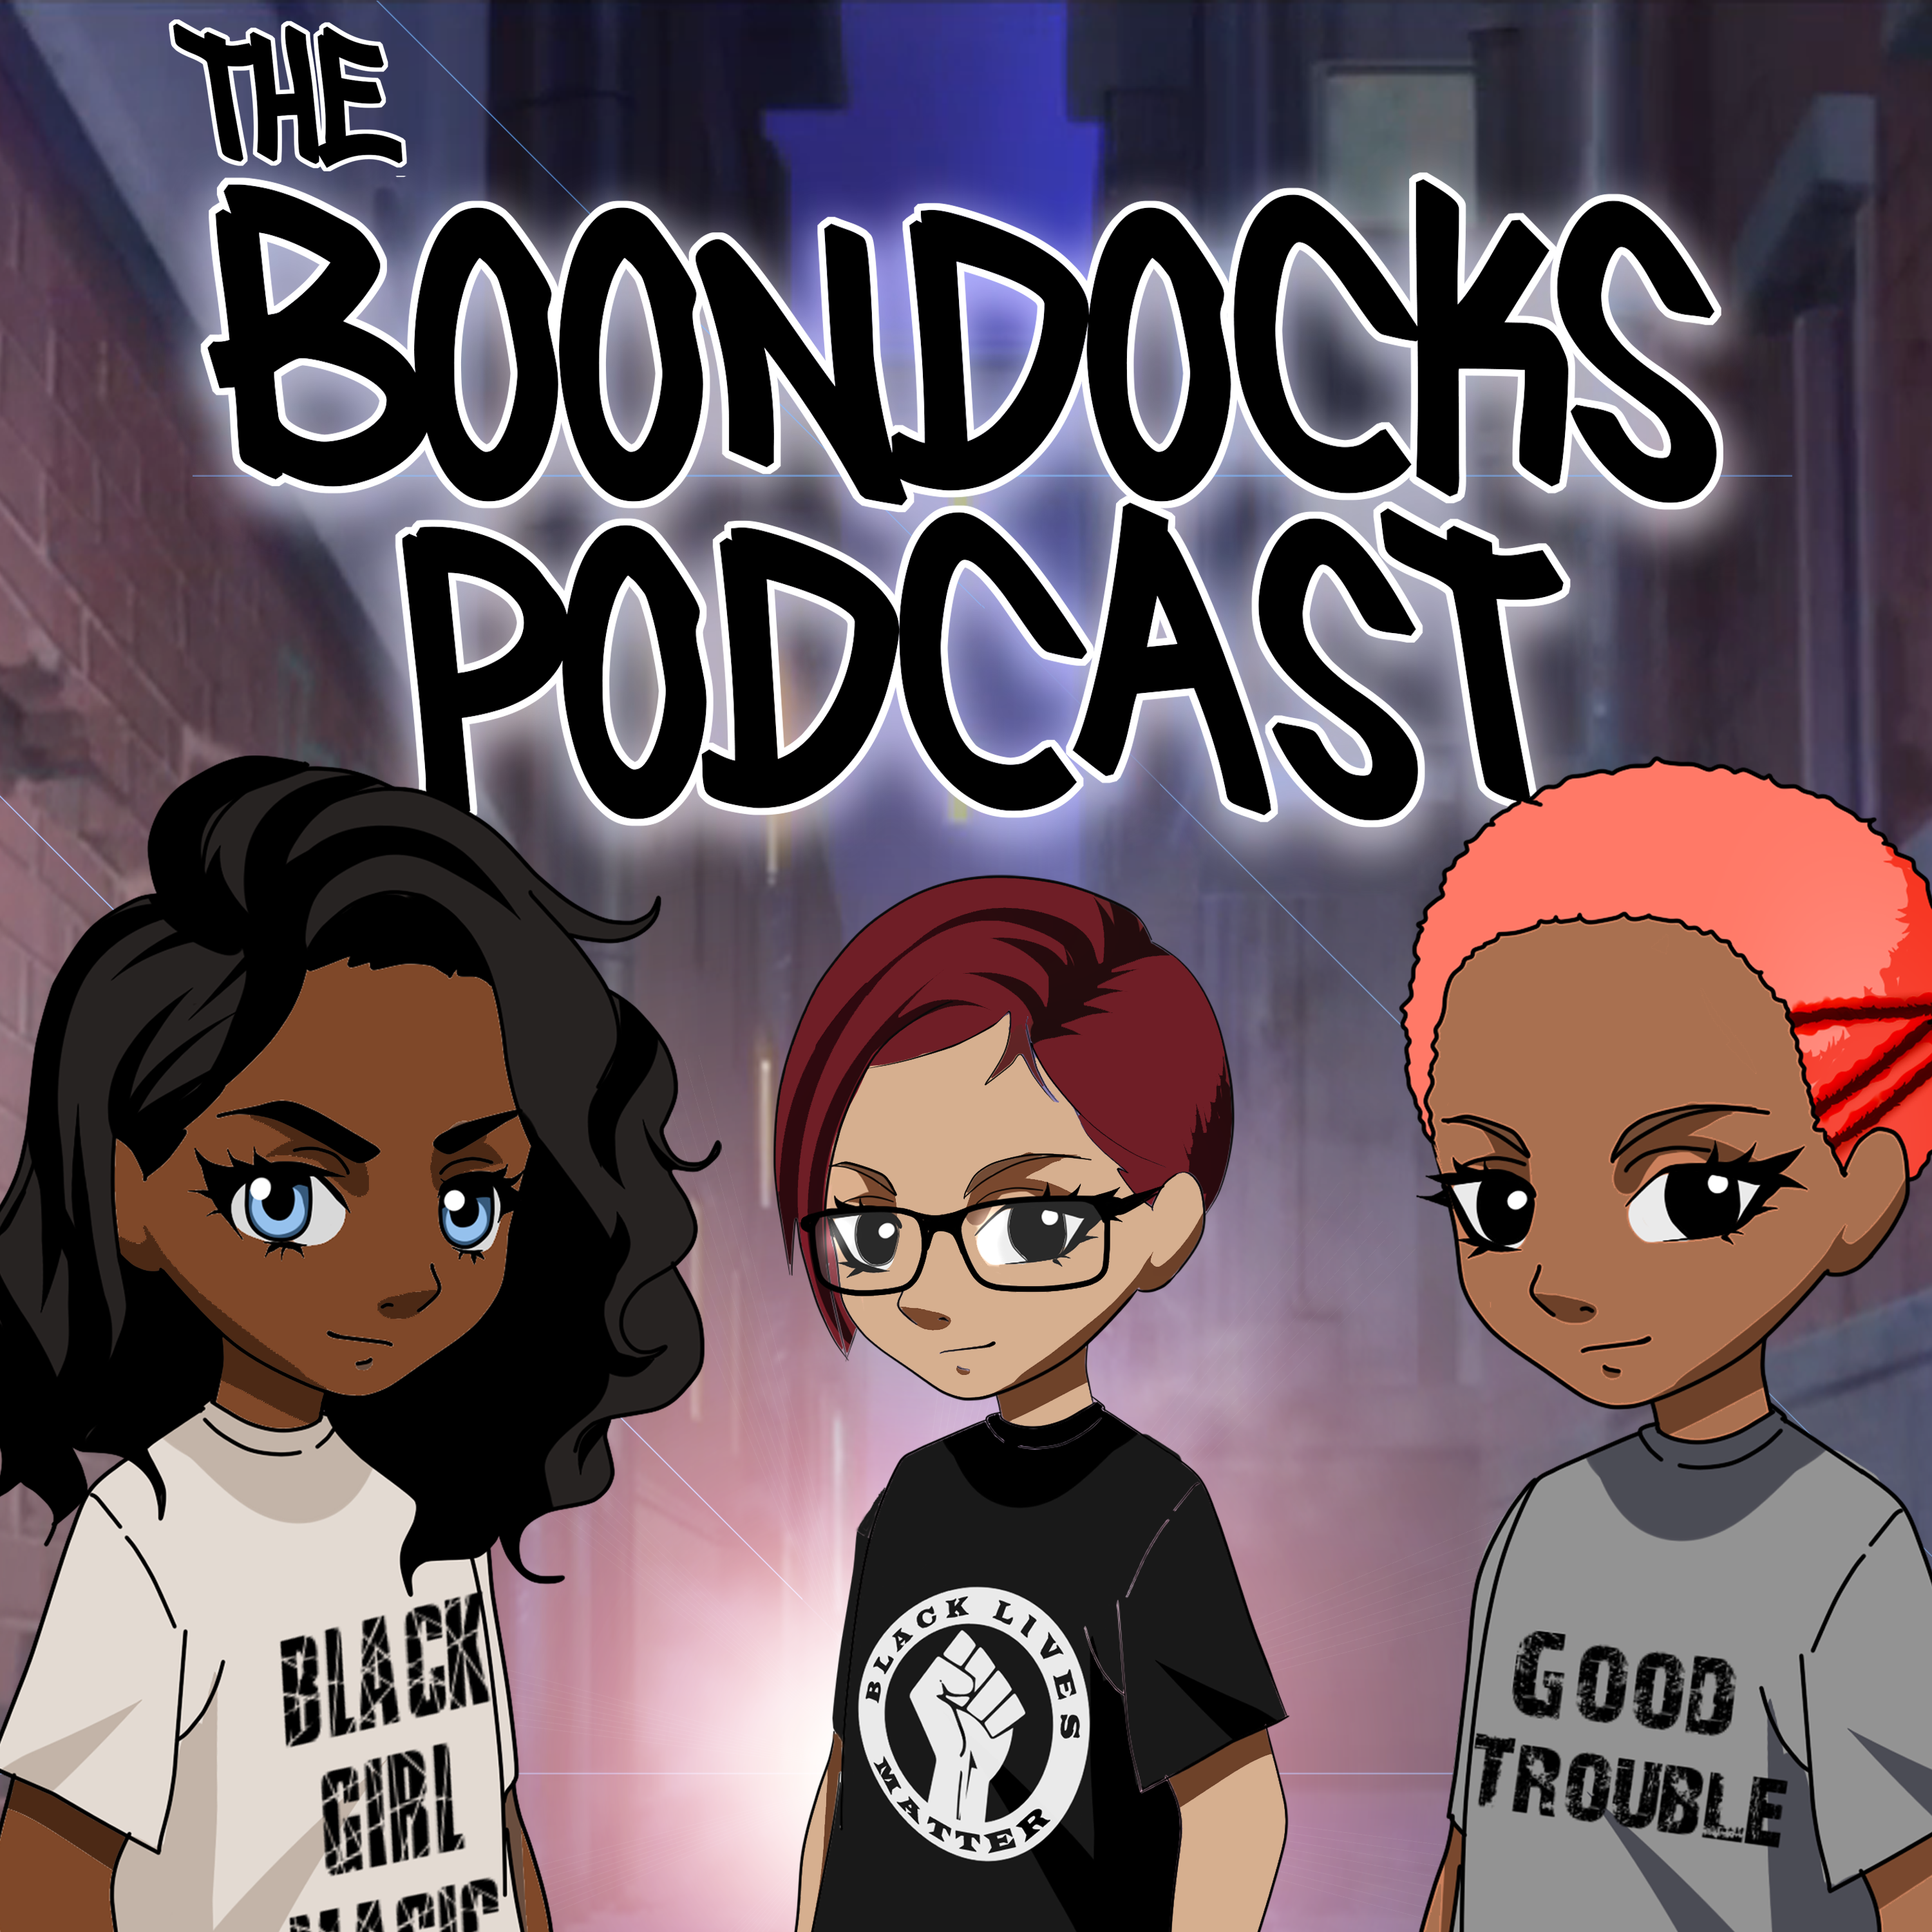 Home - The Boondocks Podcast